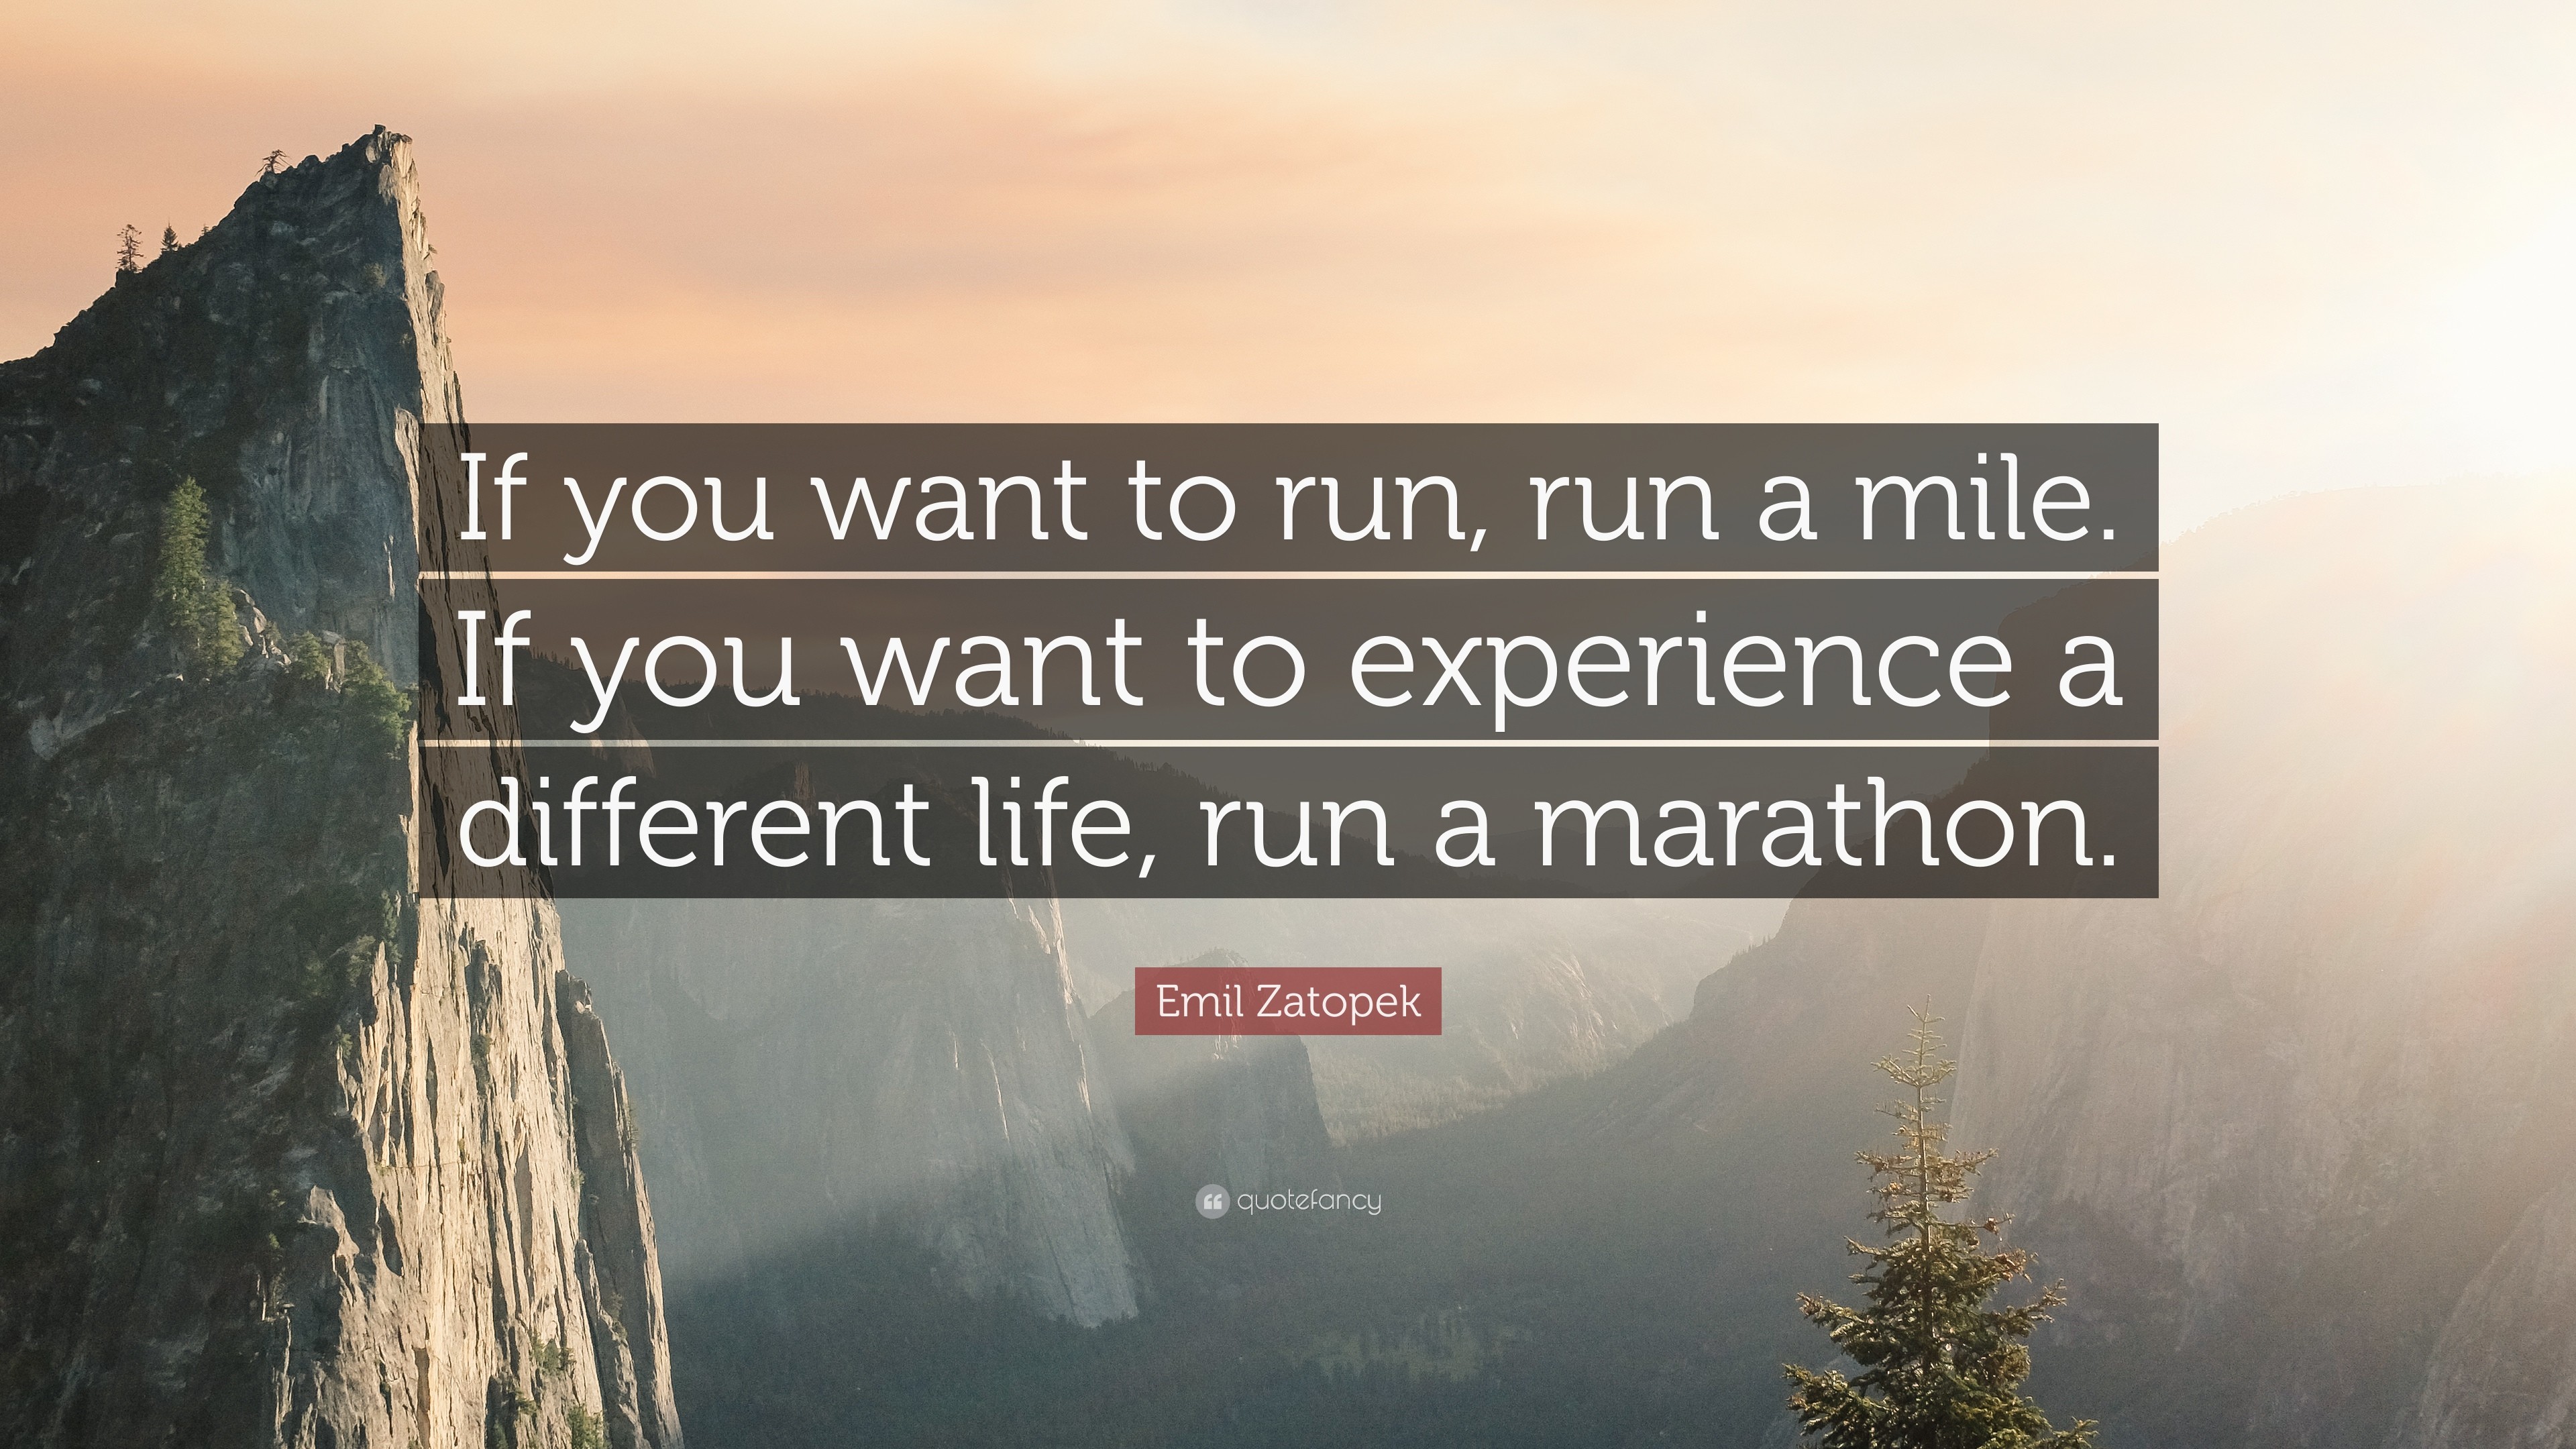 3840x2160 Emil Zatopek Quote: “If you want to run, run a mile. If